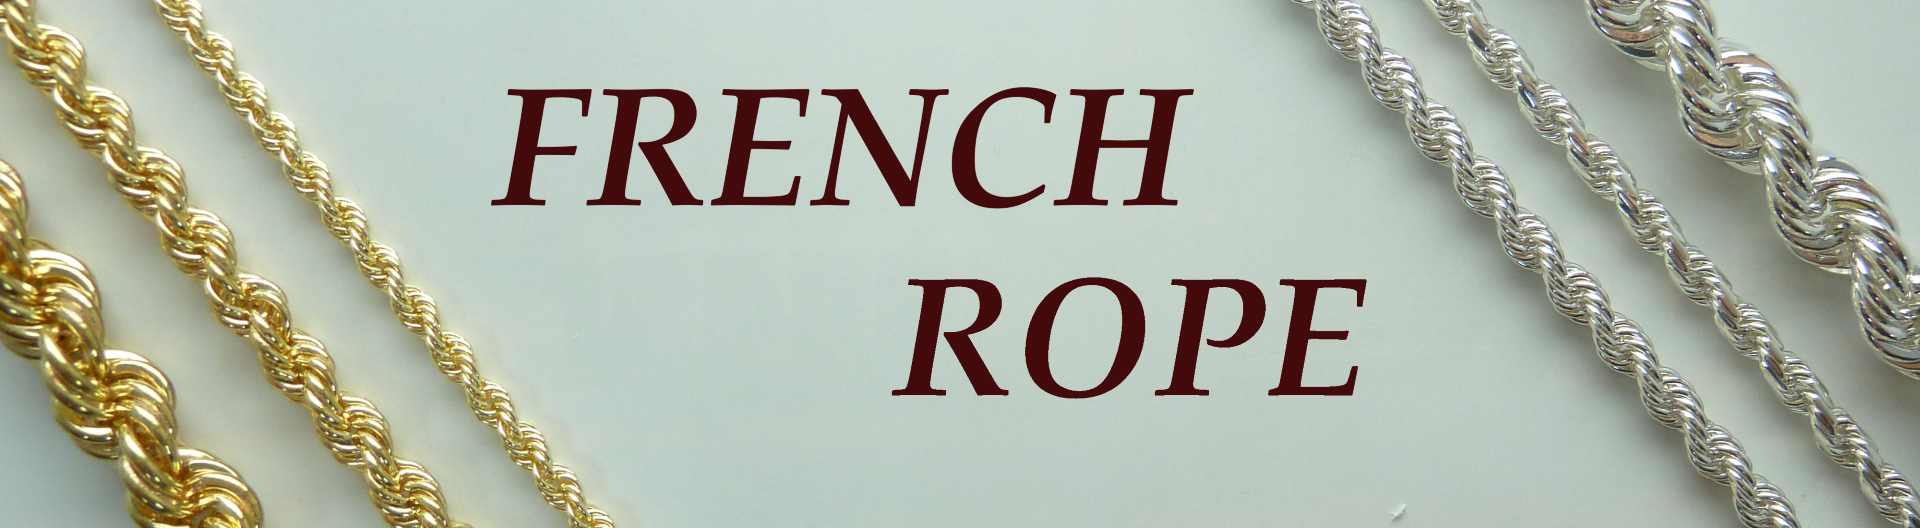 French Rope